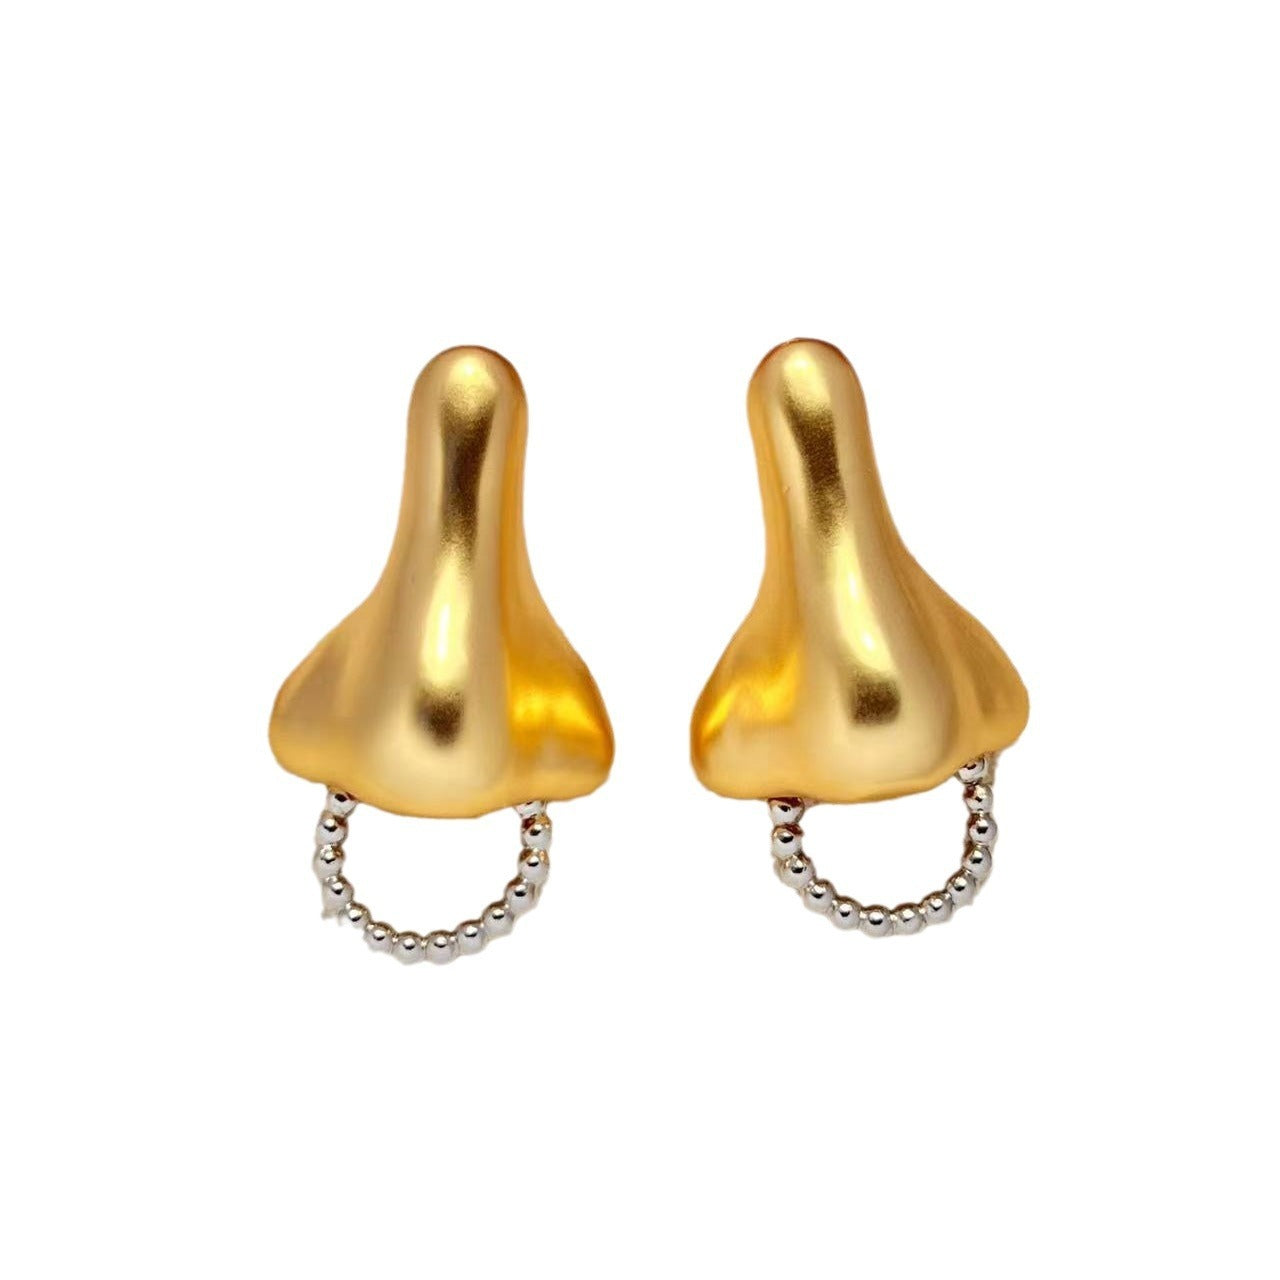 Antique Nose Ring Earrings